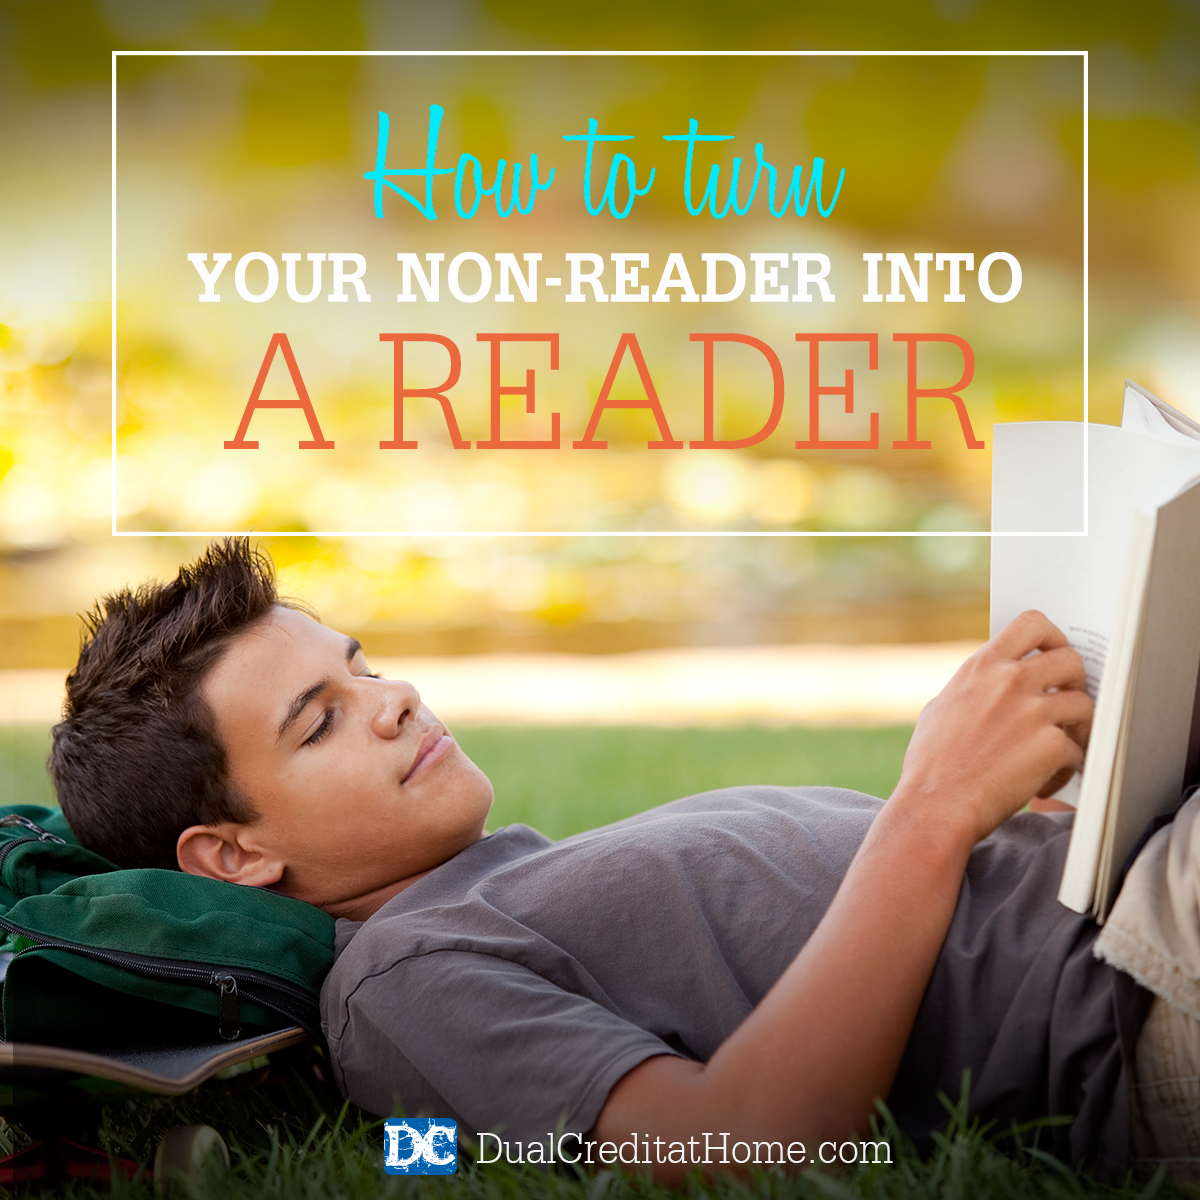 How to Turn Your Non-Reader into a Reader